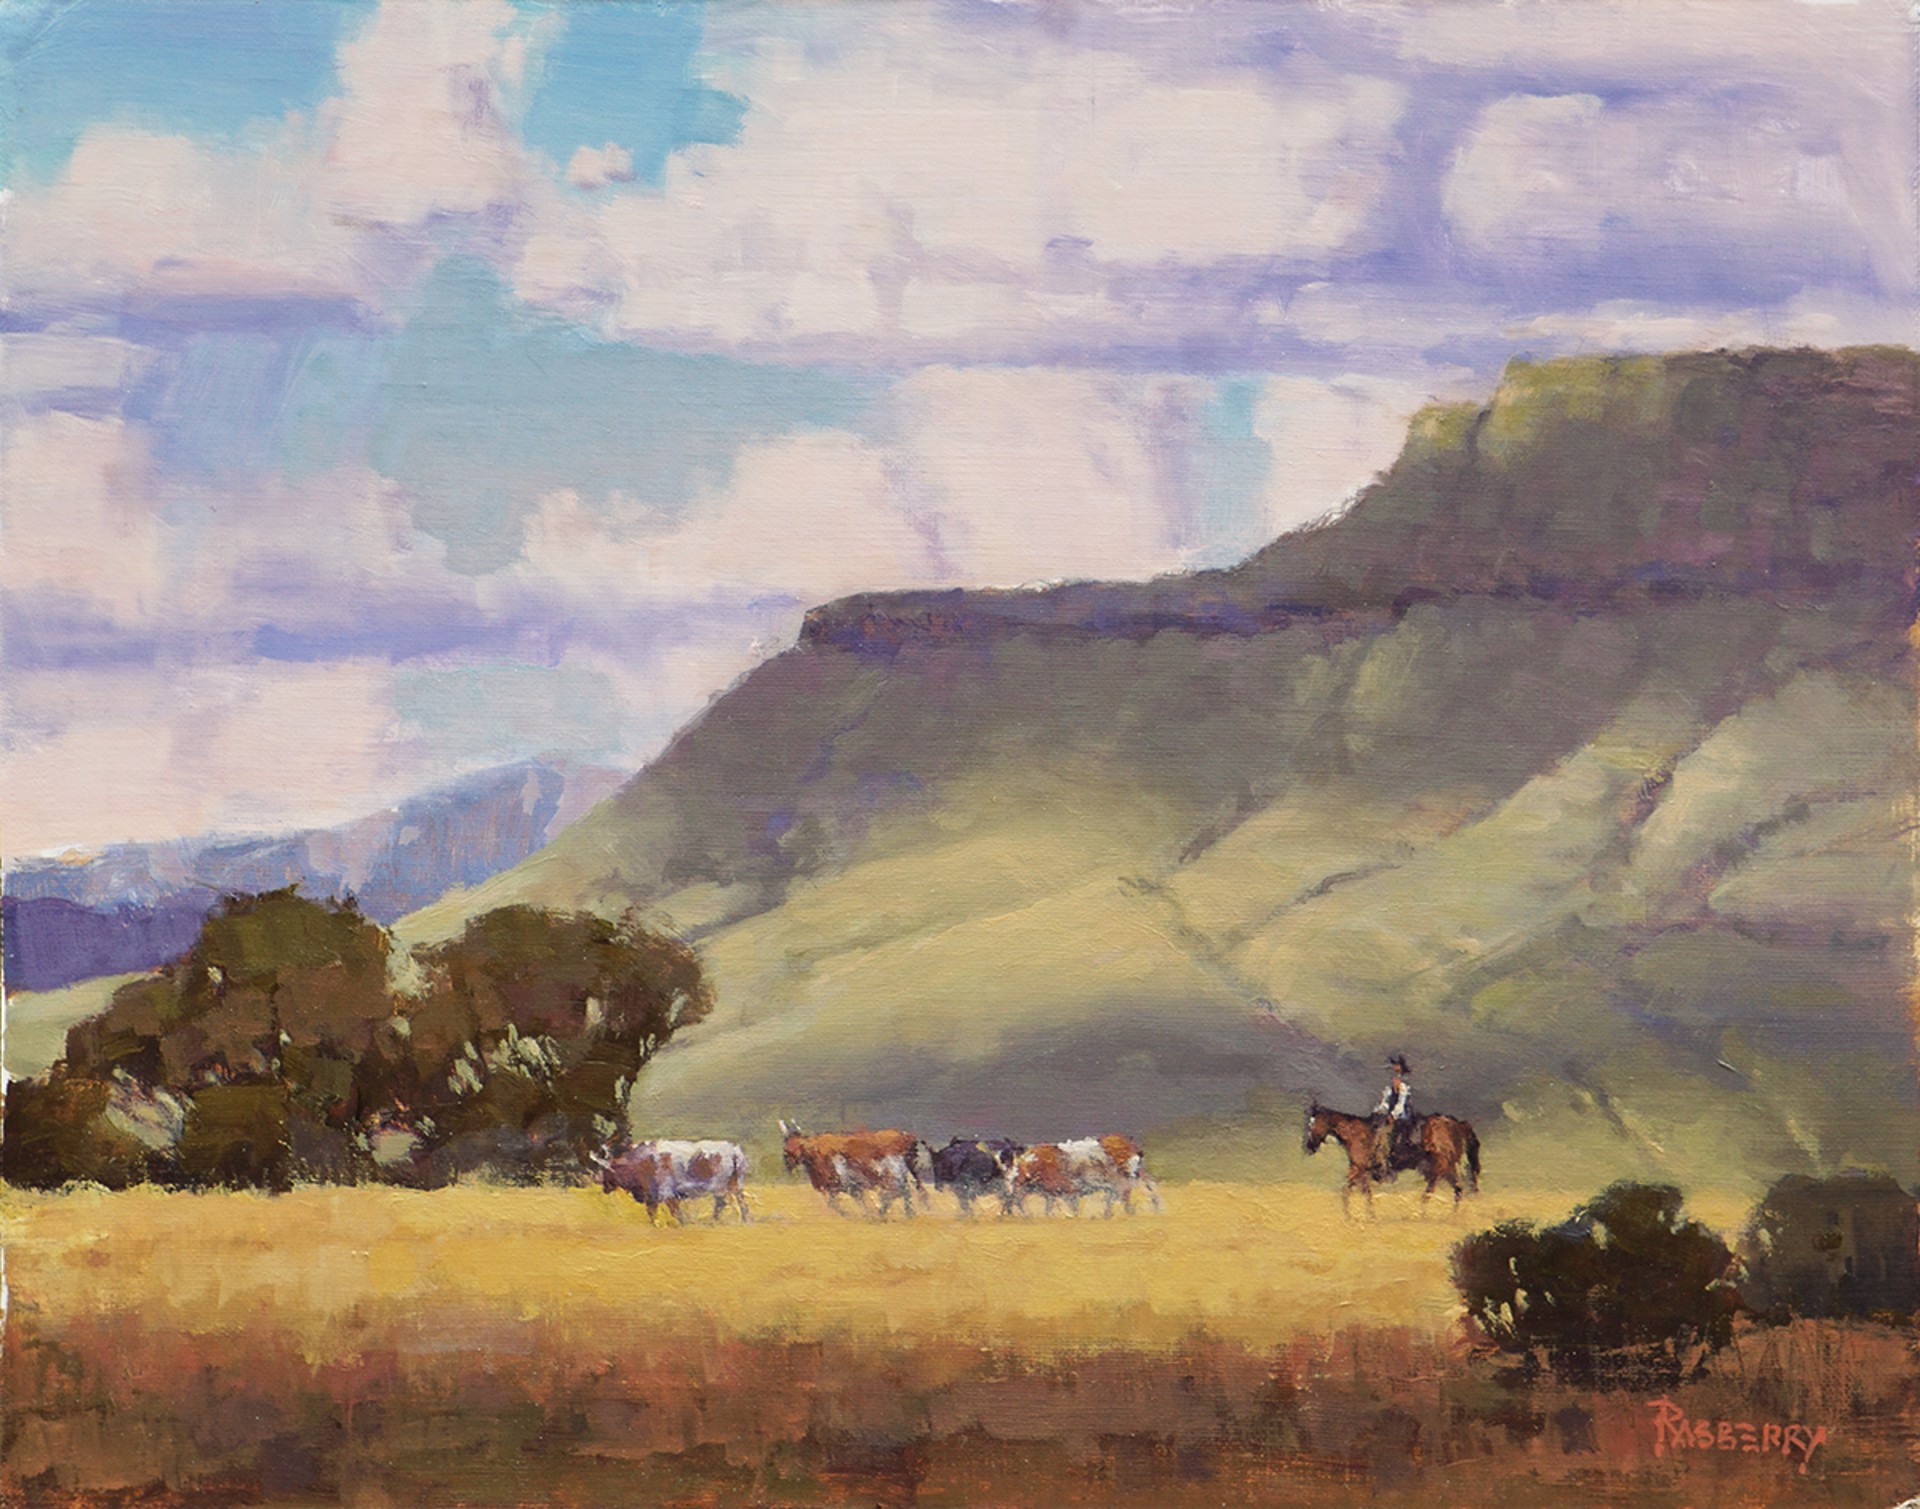 West Texas Escapees by John Rasberry